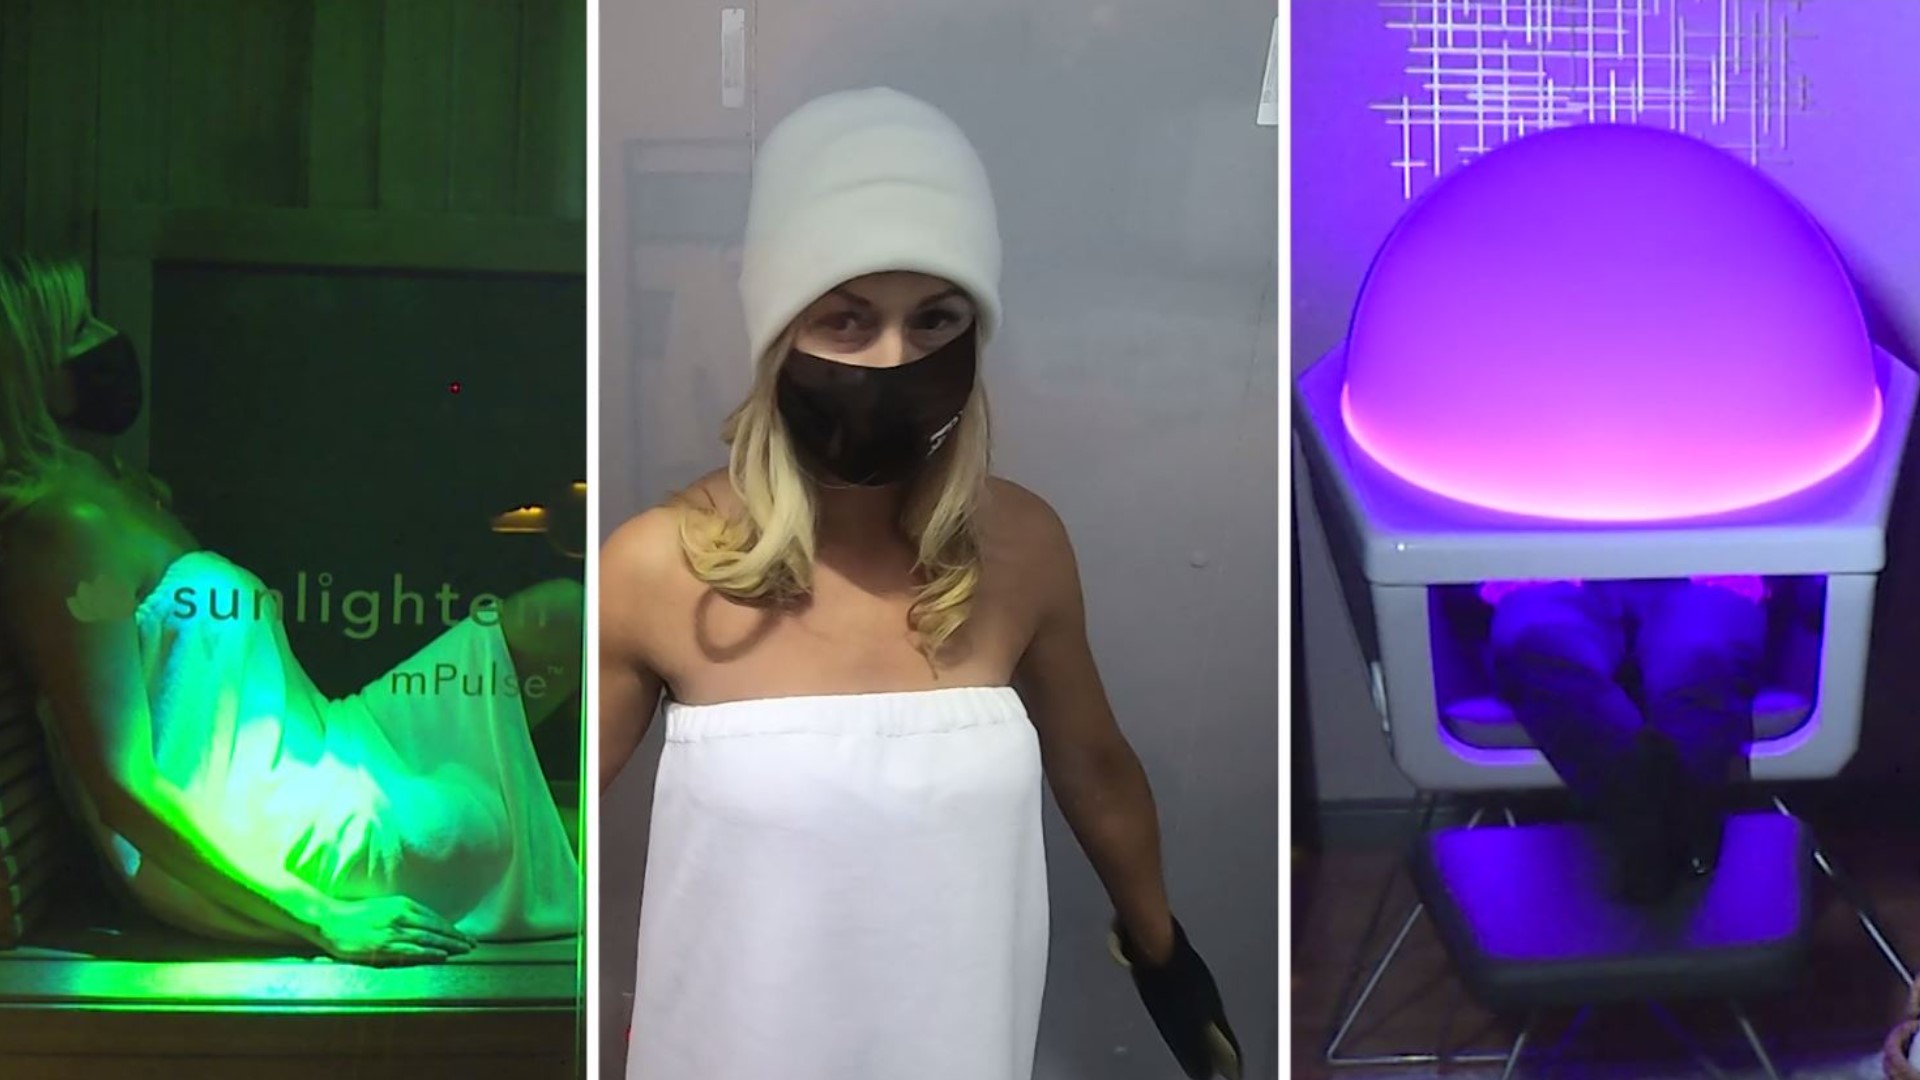 Grit City Wellness is using cold temperatures and bright colors to help sore bodies heal